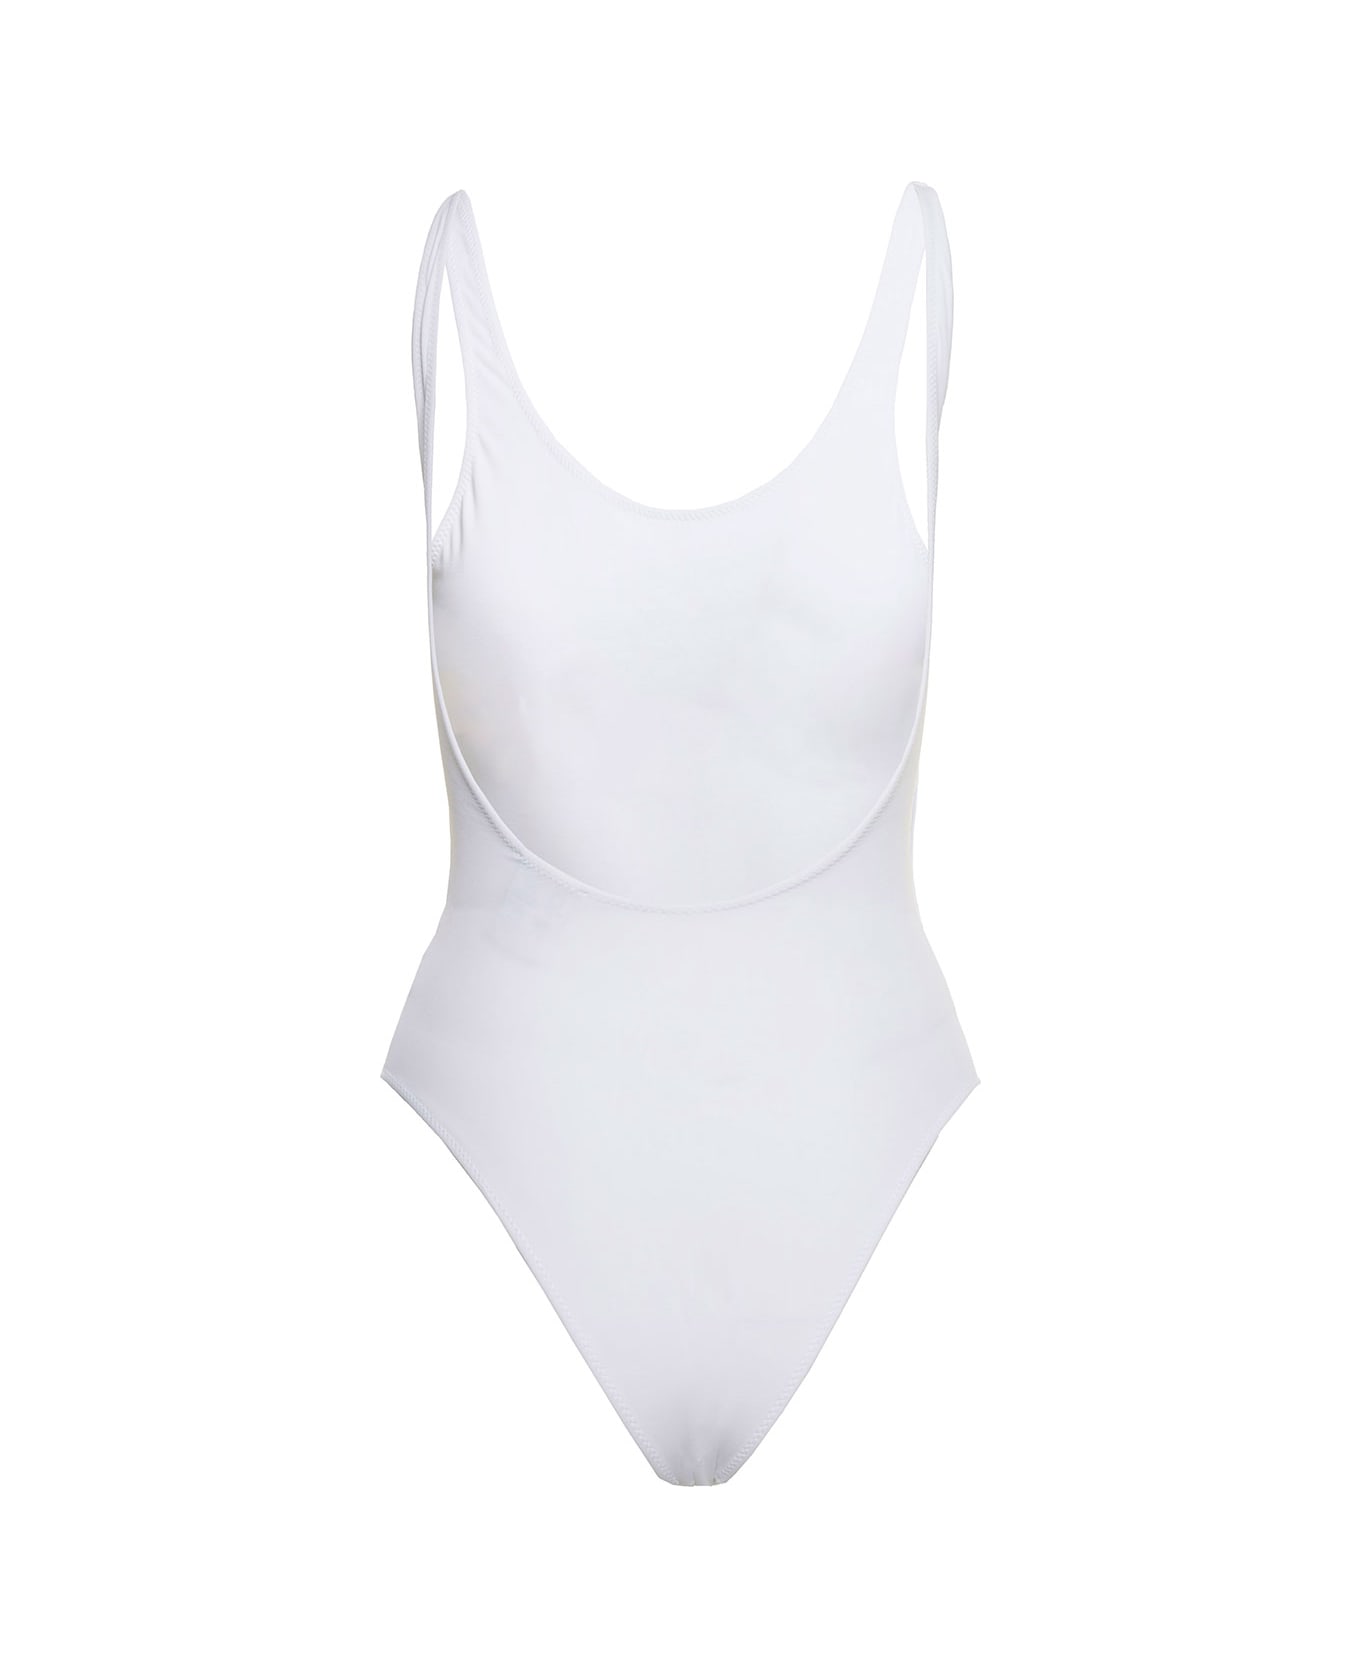 Autry White Swimsuit With Logo In Polyamide Woman - White